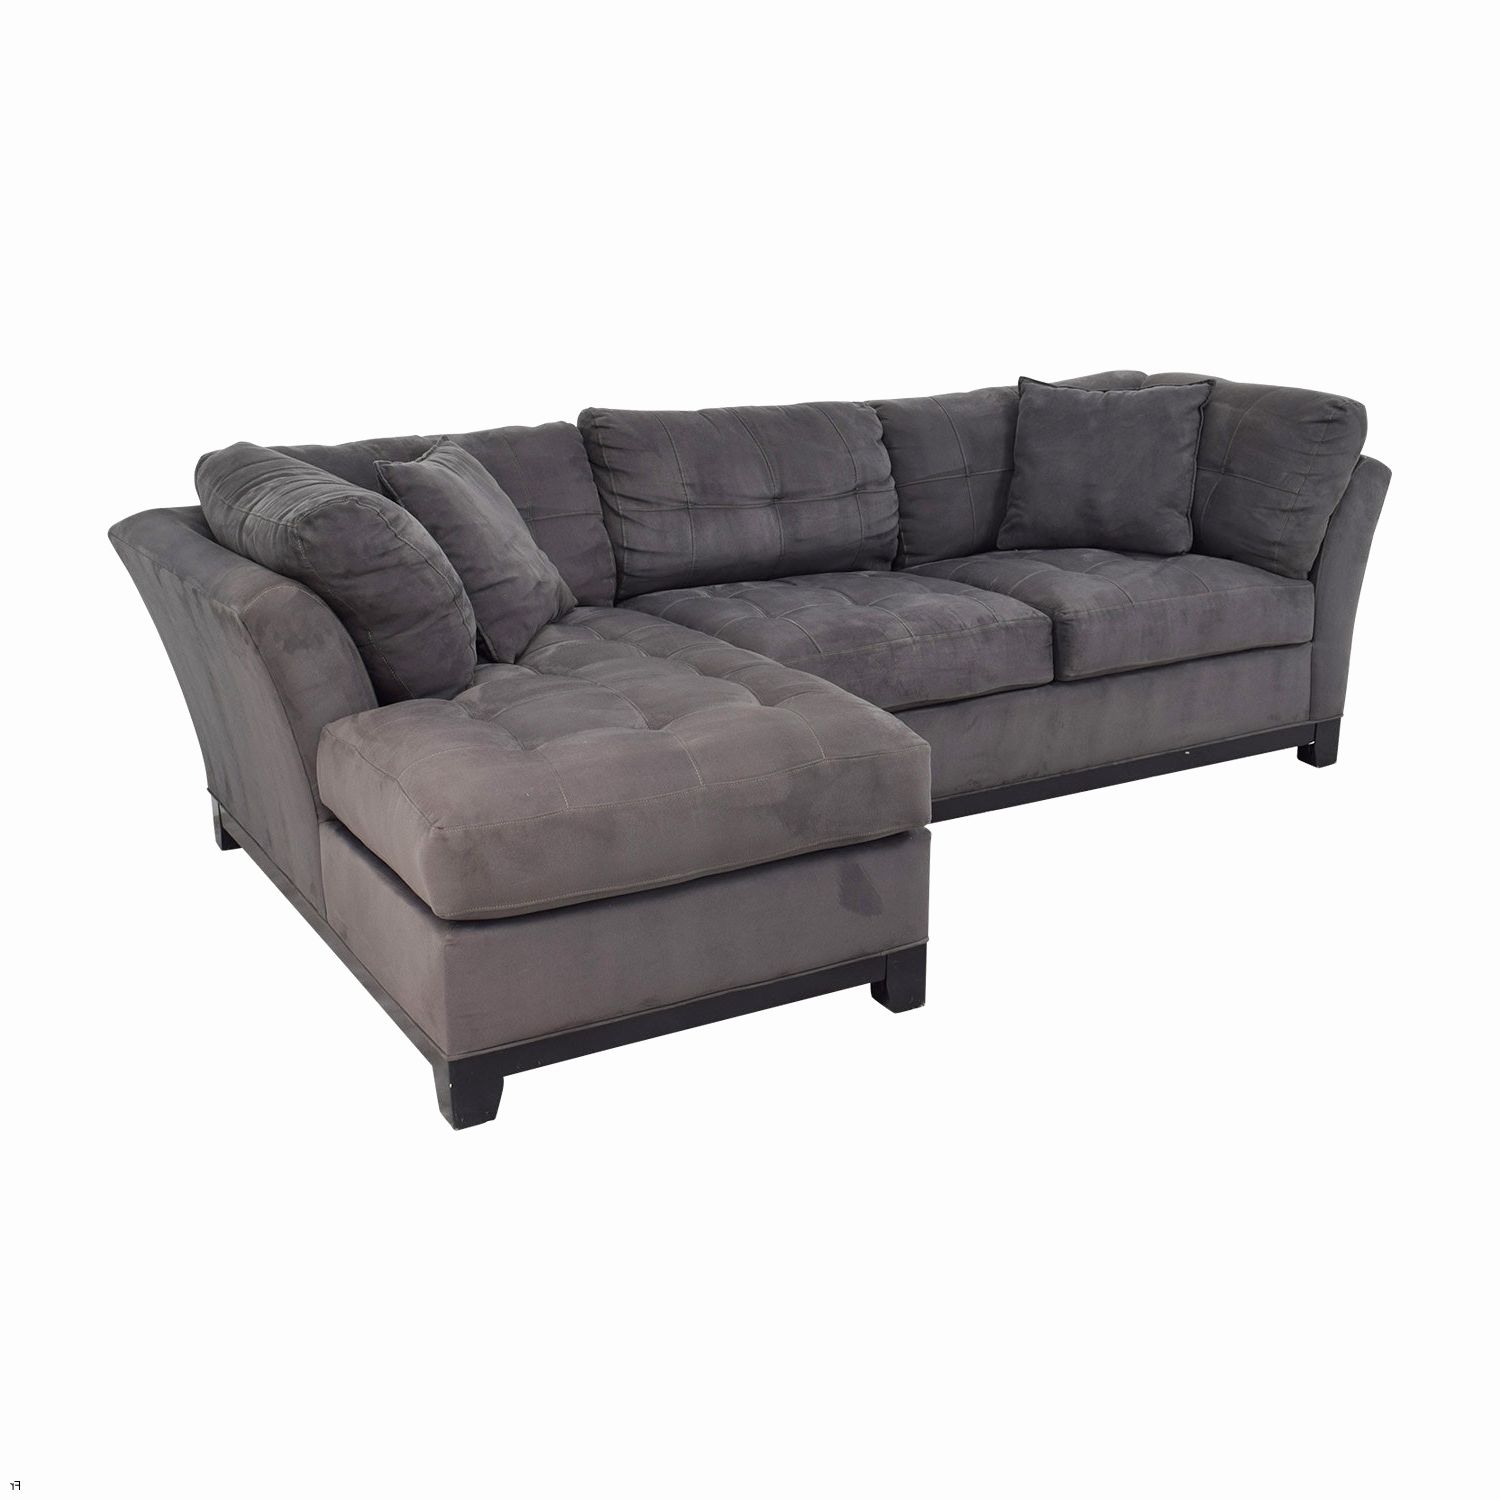 Newest Raymour And Flanigan Sectional Sofas For Awesome 7 Seat Sectional Sofa Pictures – Home Design (Photo 3 of 15)